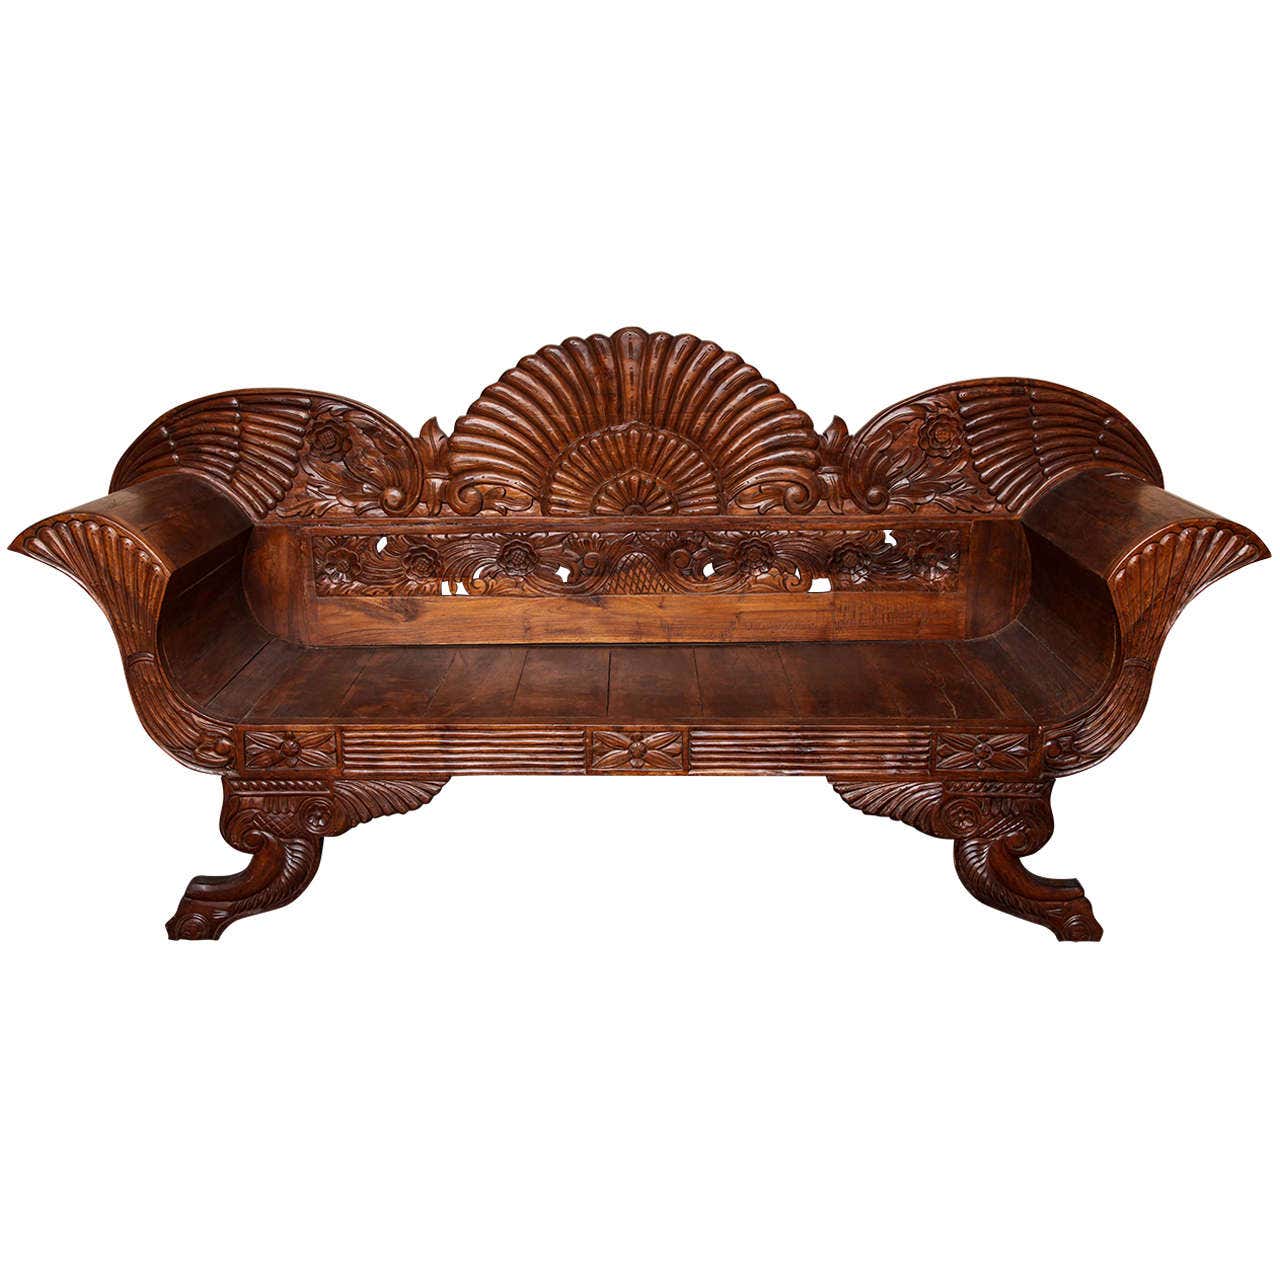 The Authentic Charm Of Indonesia Teak Furniture